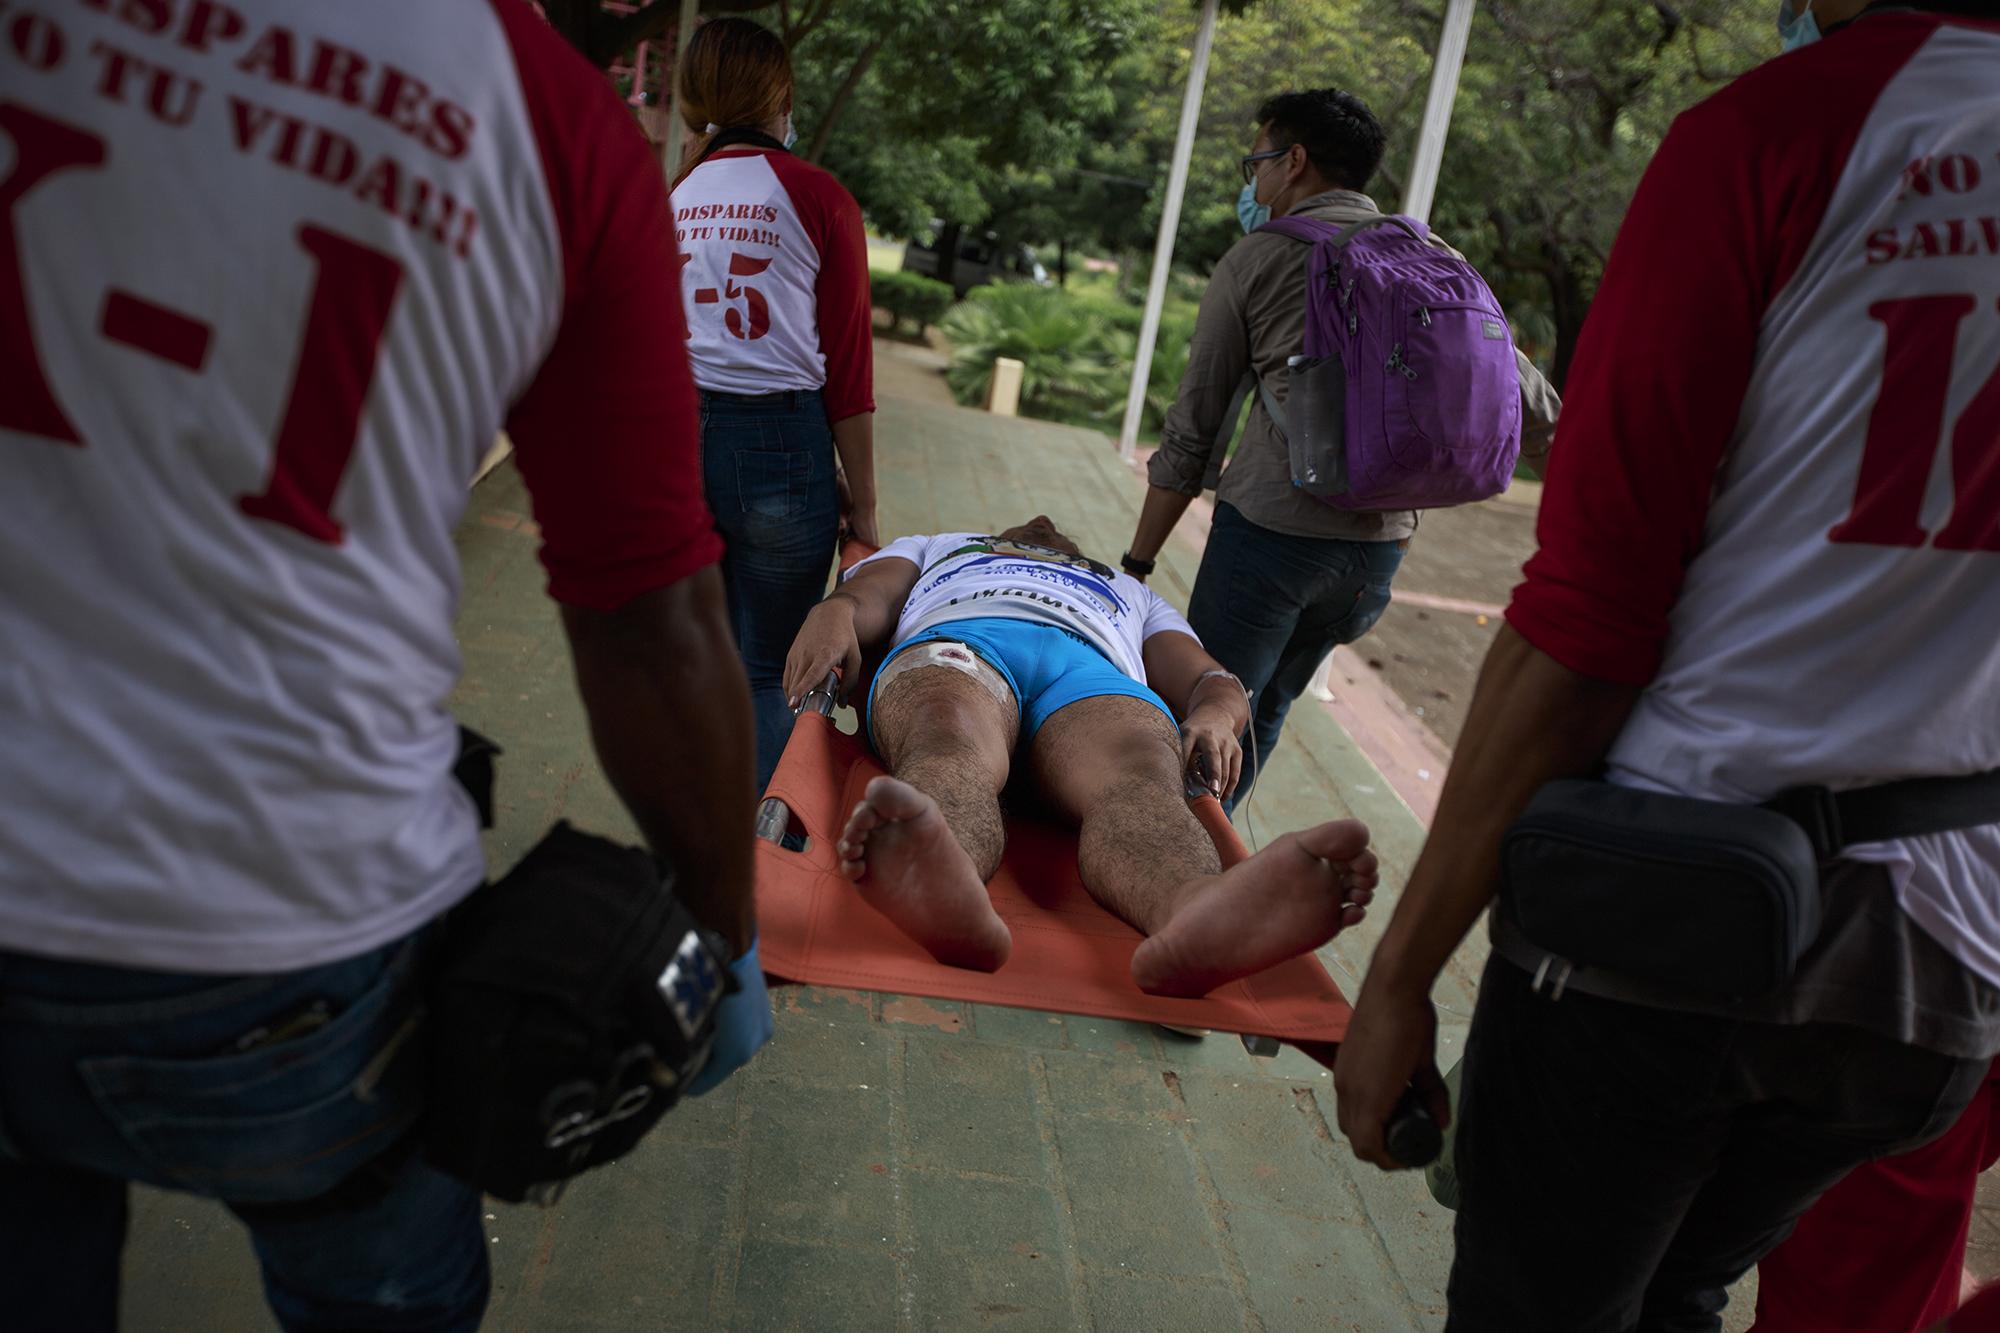 A rebel medical brigade tends to a man with a bullet wound on university grounds. The man was wounded during a march that was attacked by unknown assailants. Another man, 23, who had sold handkerchiefs and flags at the march, died of a bullet wound to his forehead. June 30, 2018.